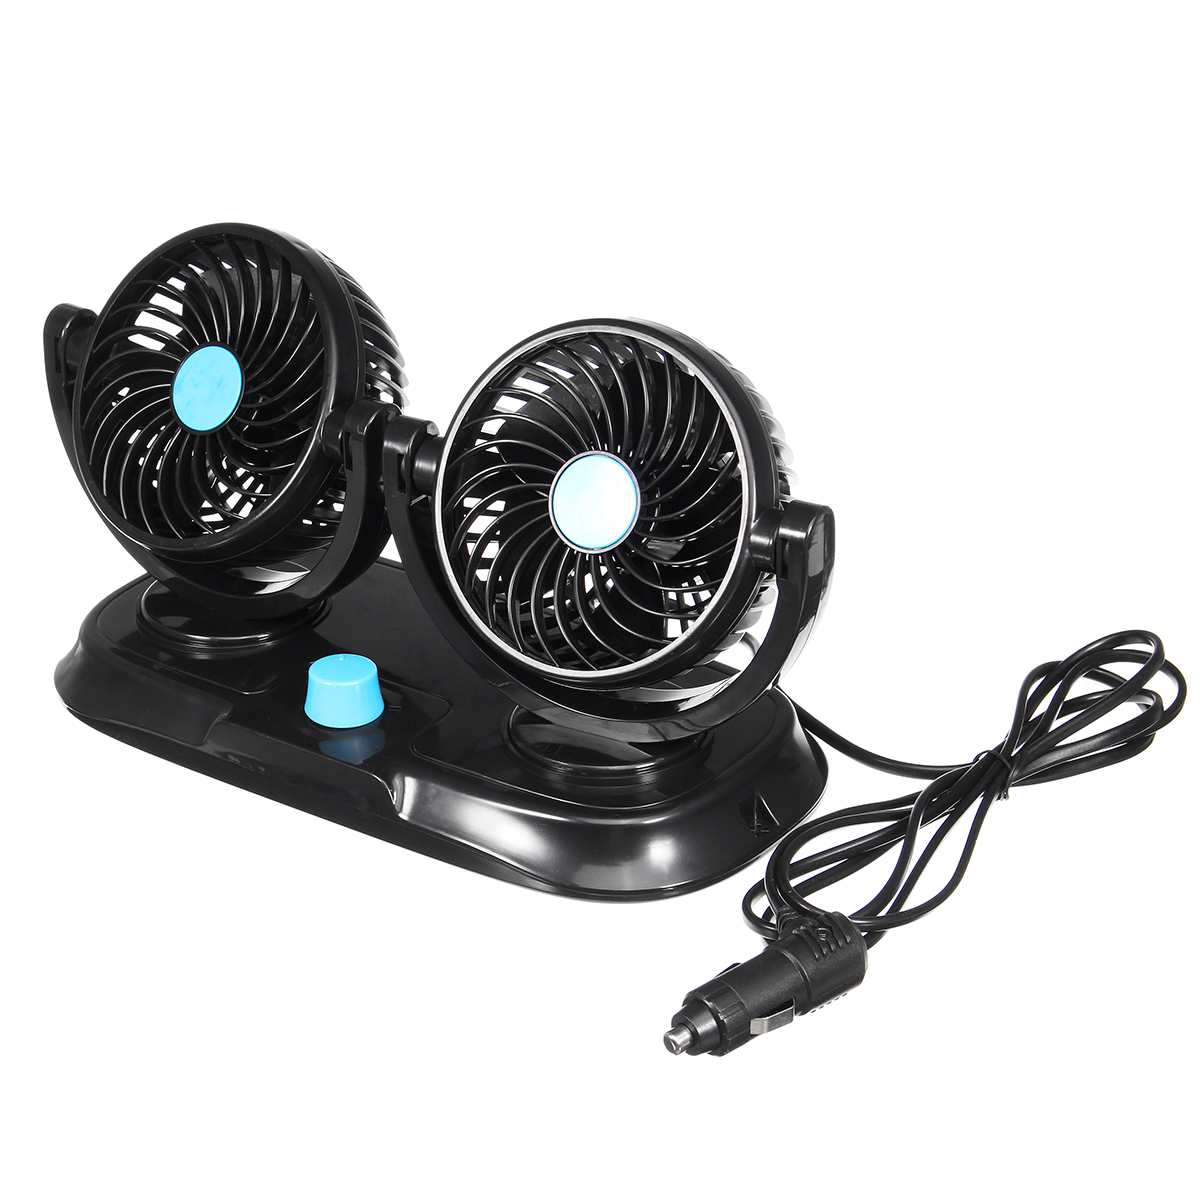 12V-Adjustable-Double-360-Degrees-Mini-Oscillating-Fan-Rotation-Cooling-Fan-Air-Conditioner-1338437-5